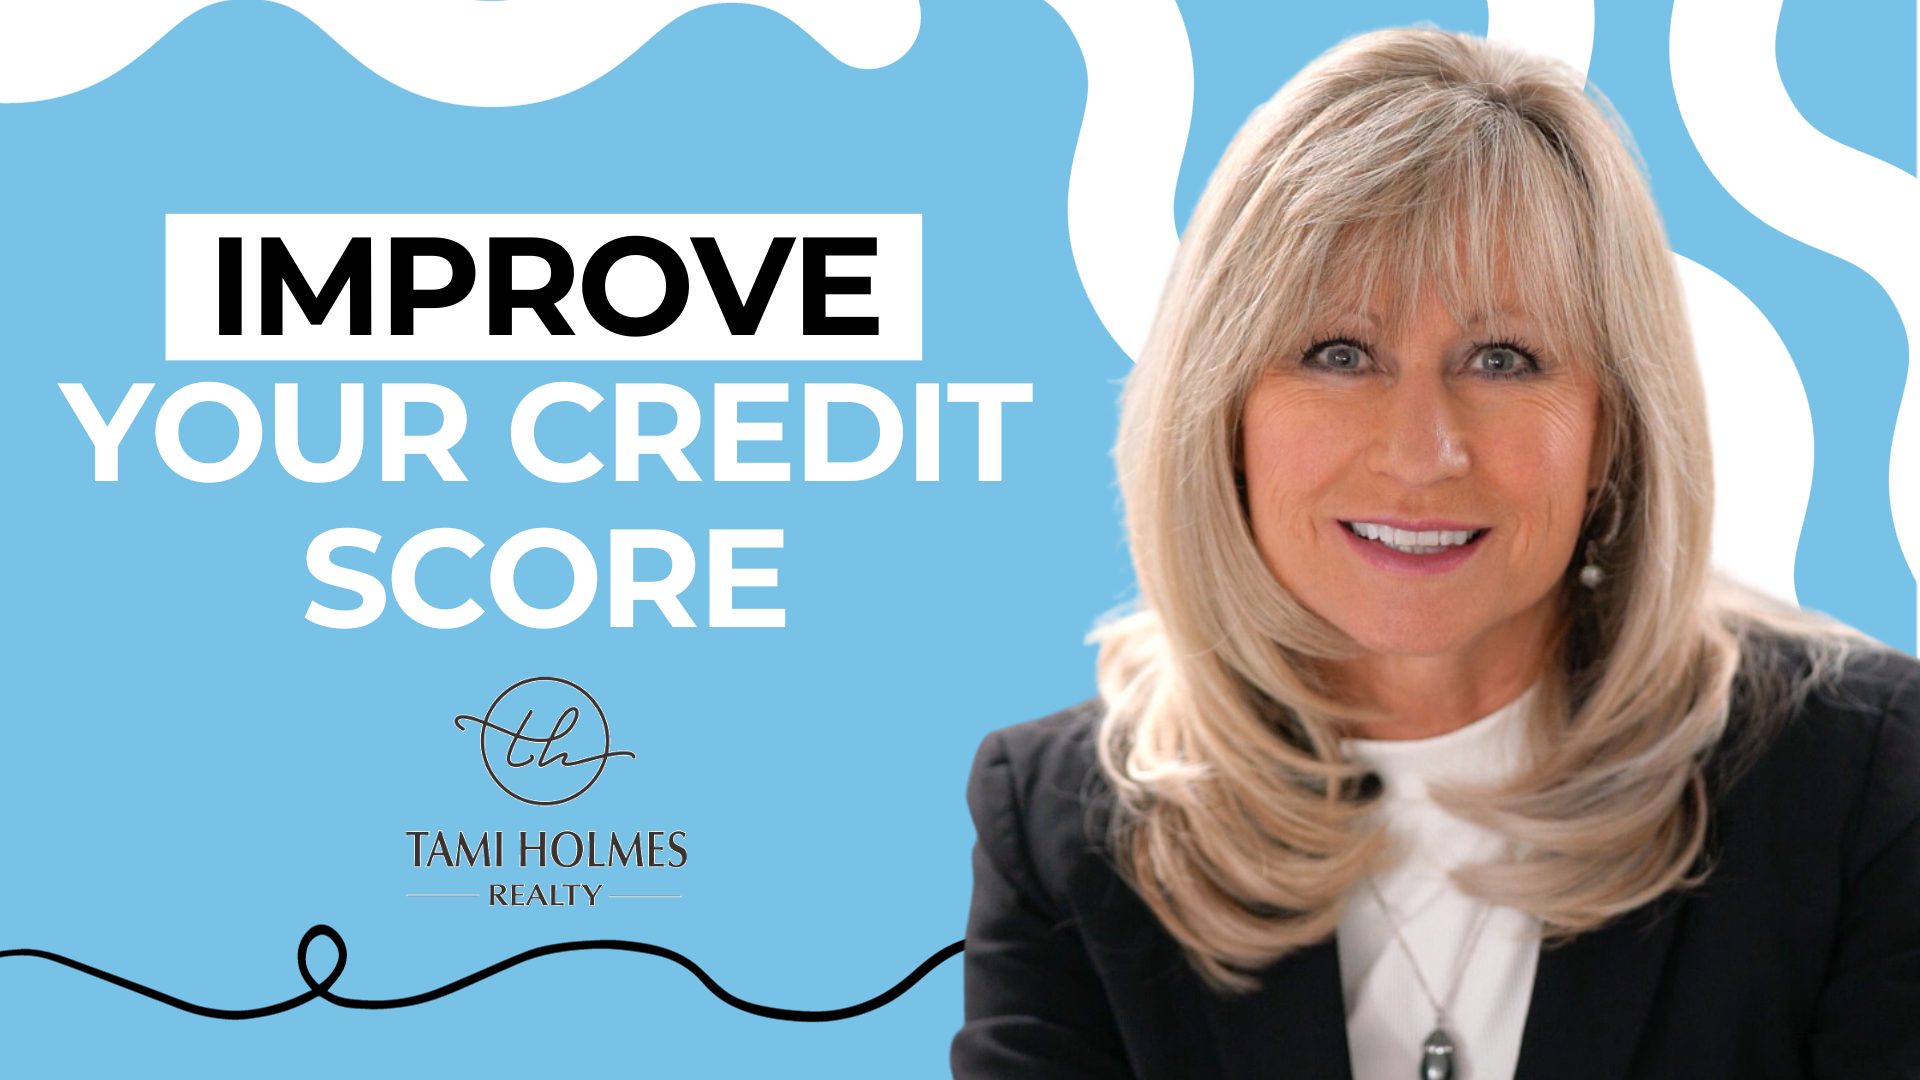 Upgrade Your Credit Score: Transform Your Financial Future With These Steps